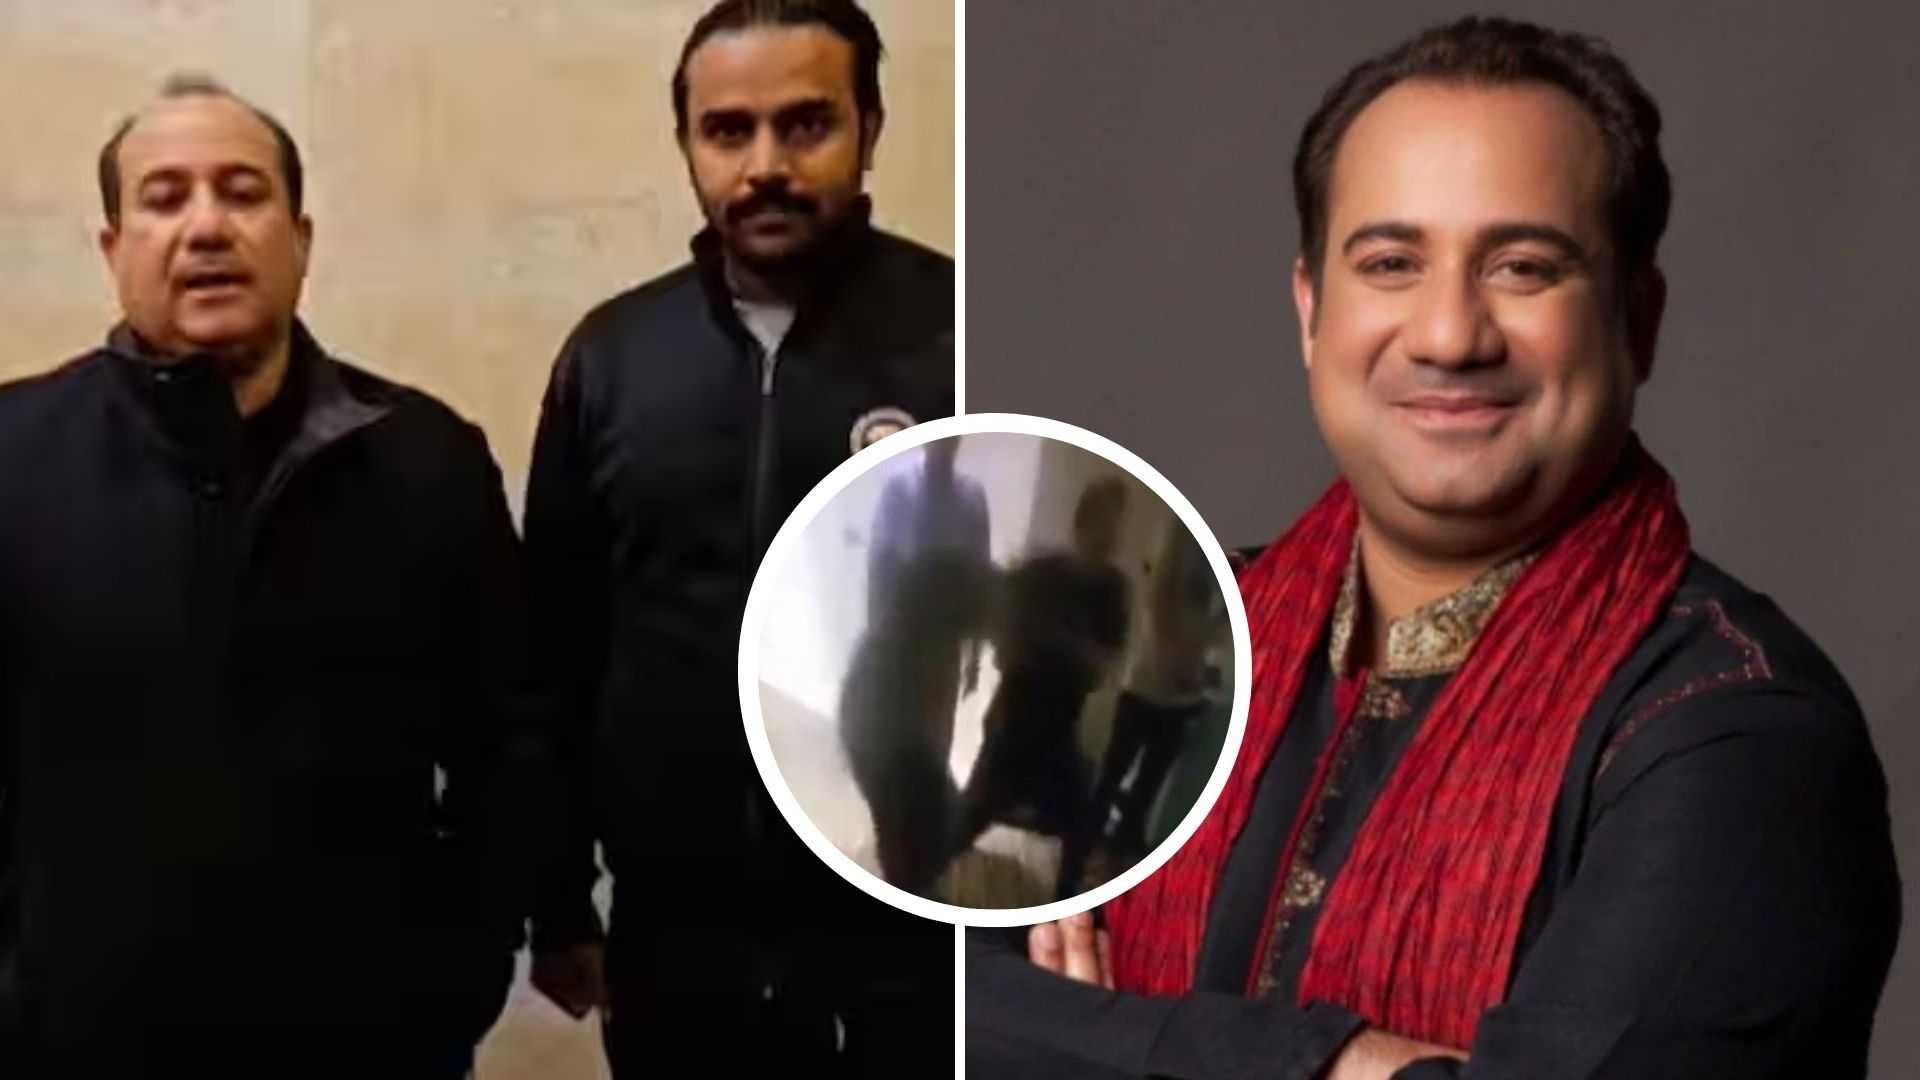 Rahat Fateh Ali Khan shares clarification after video of him thrashing a man goes viral, calls it a 'personal issue'